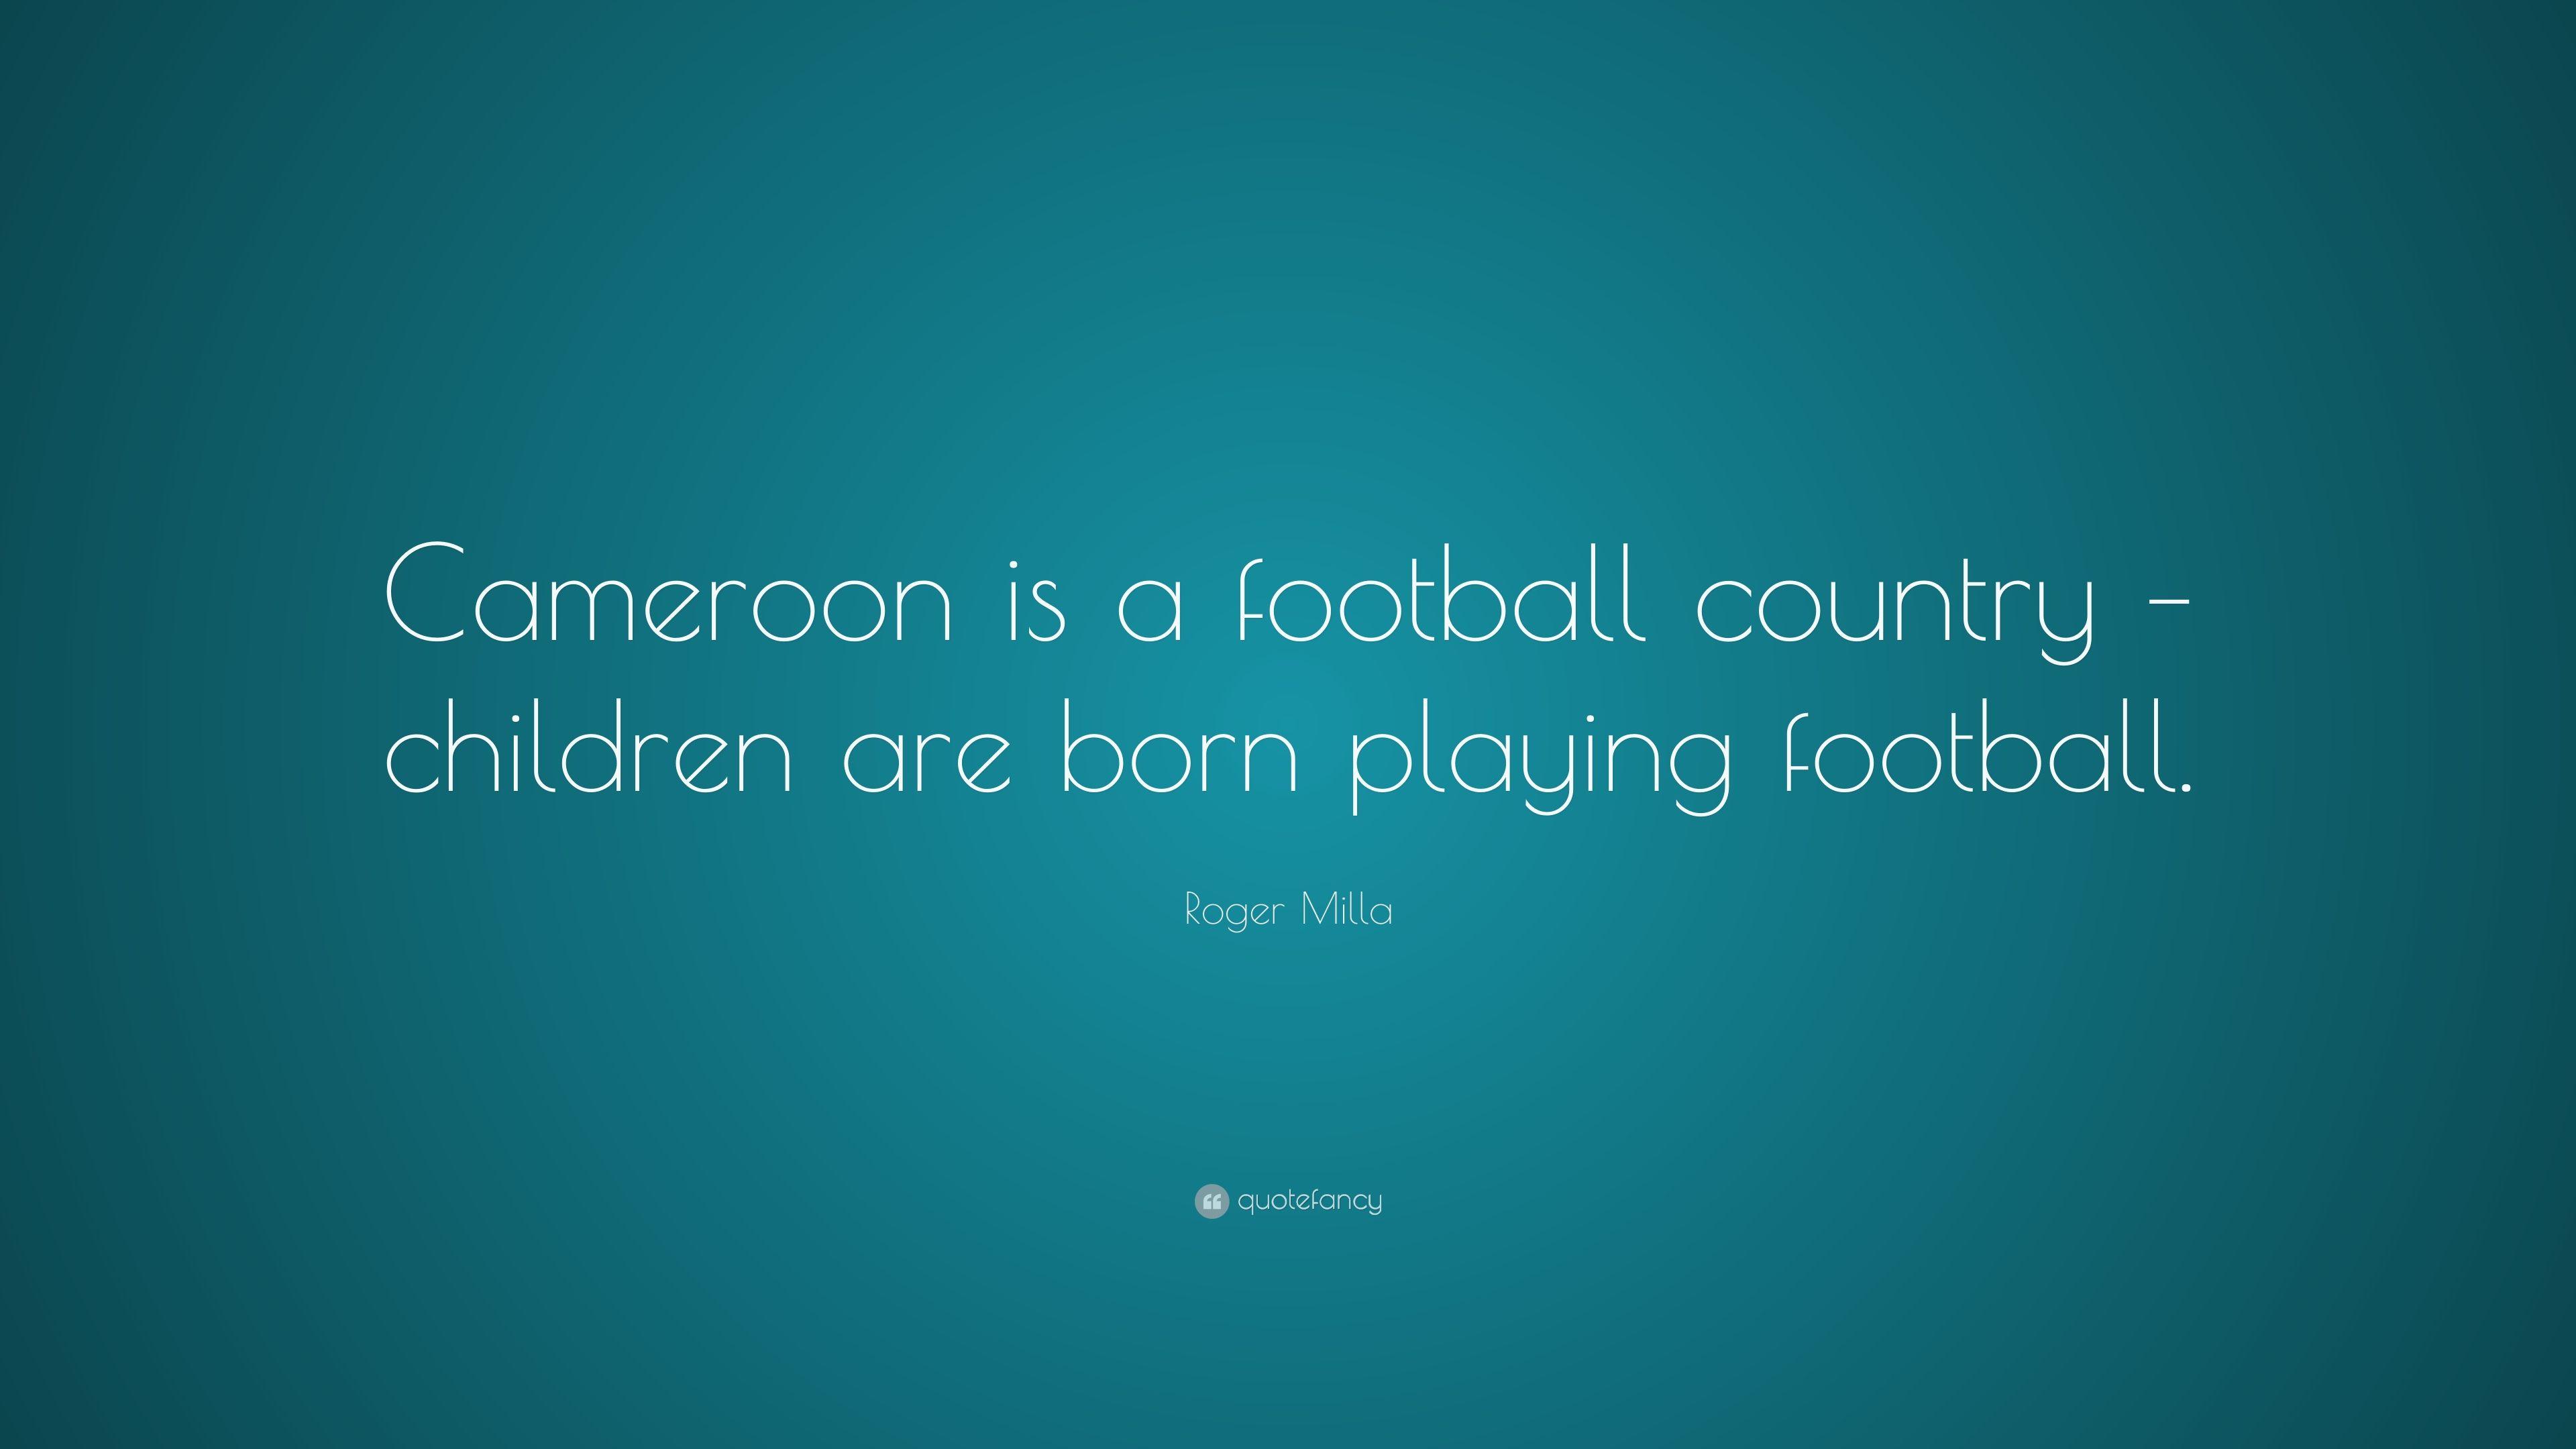 Roger Milla Quote: “Cameroon is a football country